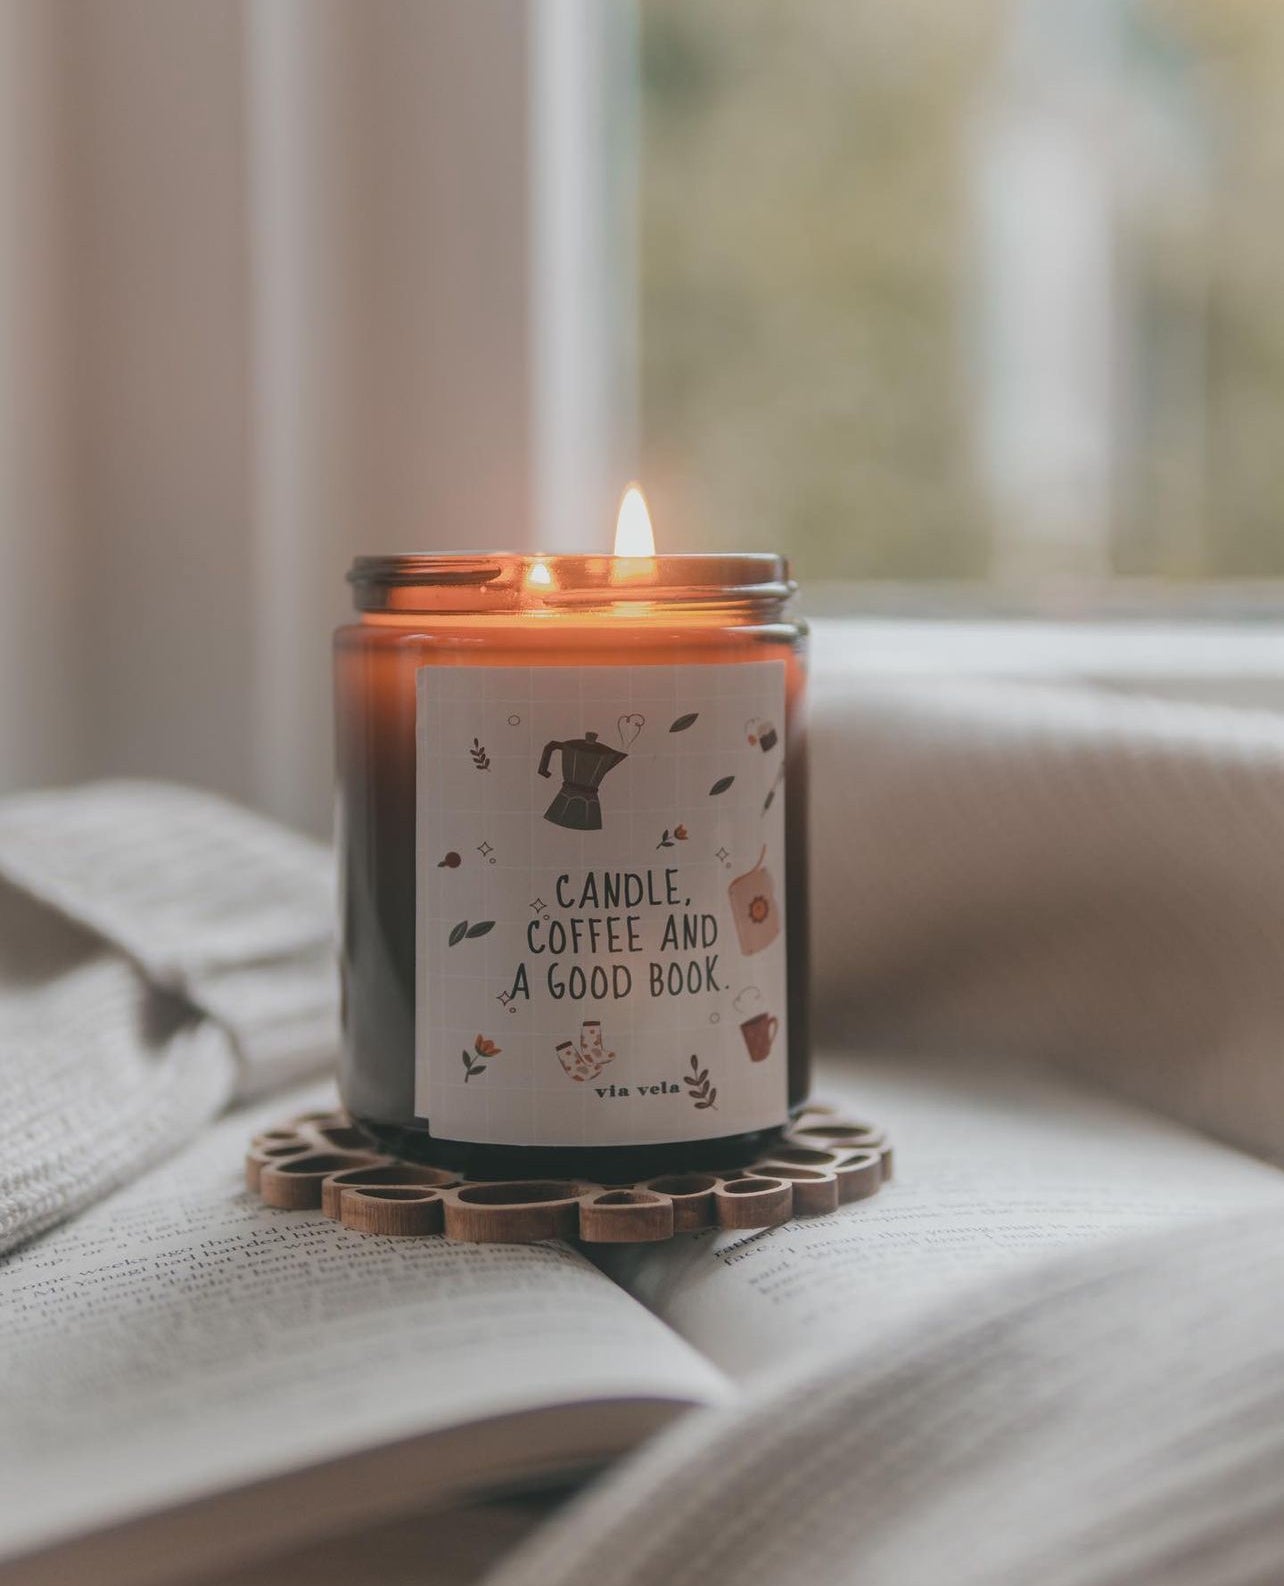 Candle, Coffee And A Good Book - Cute